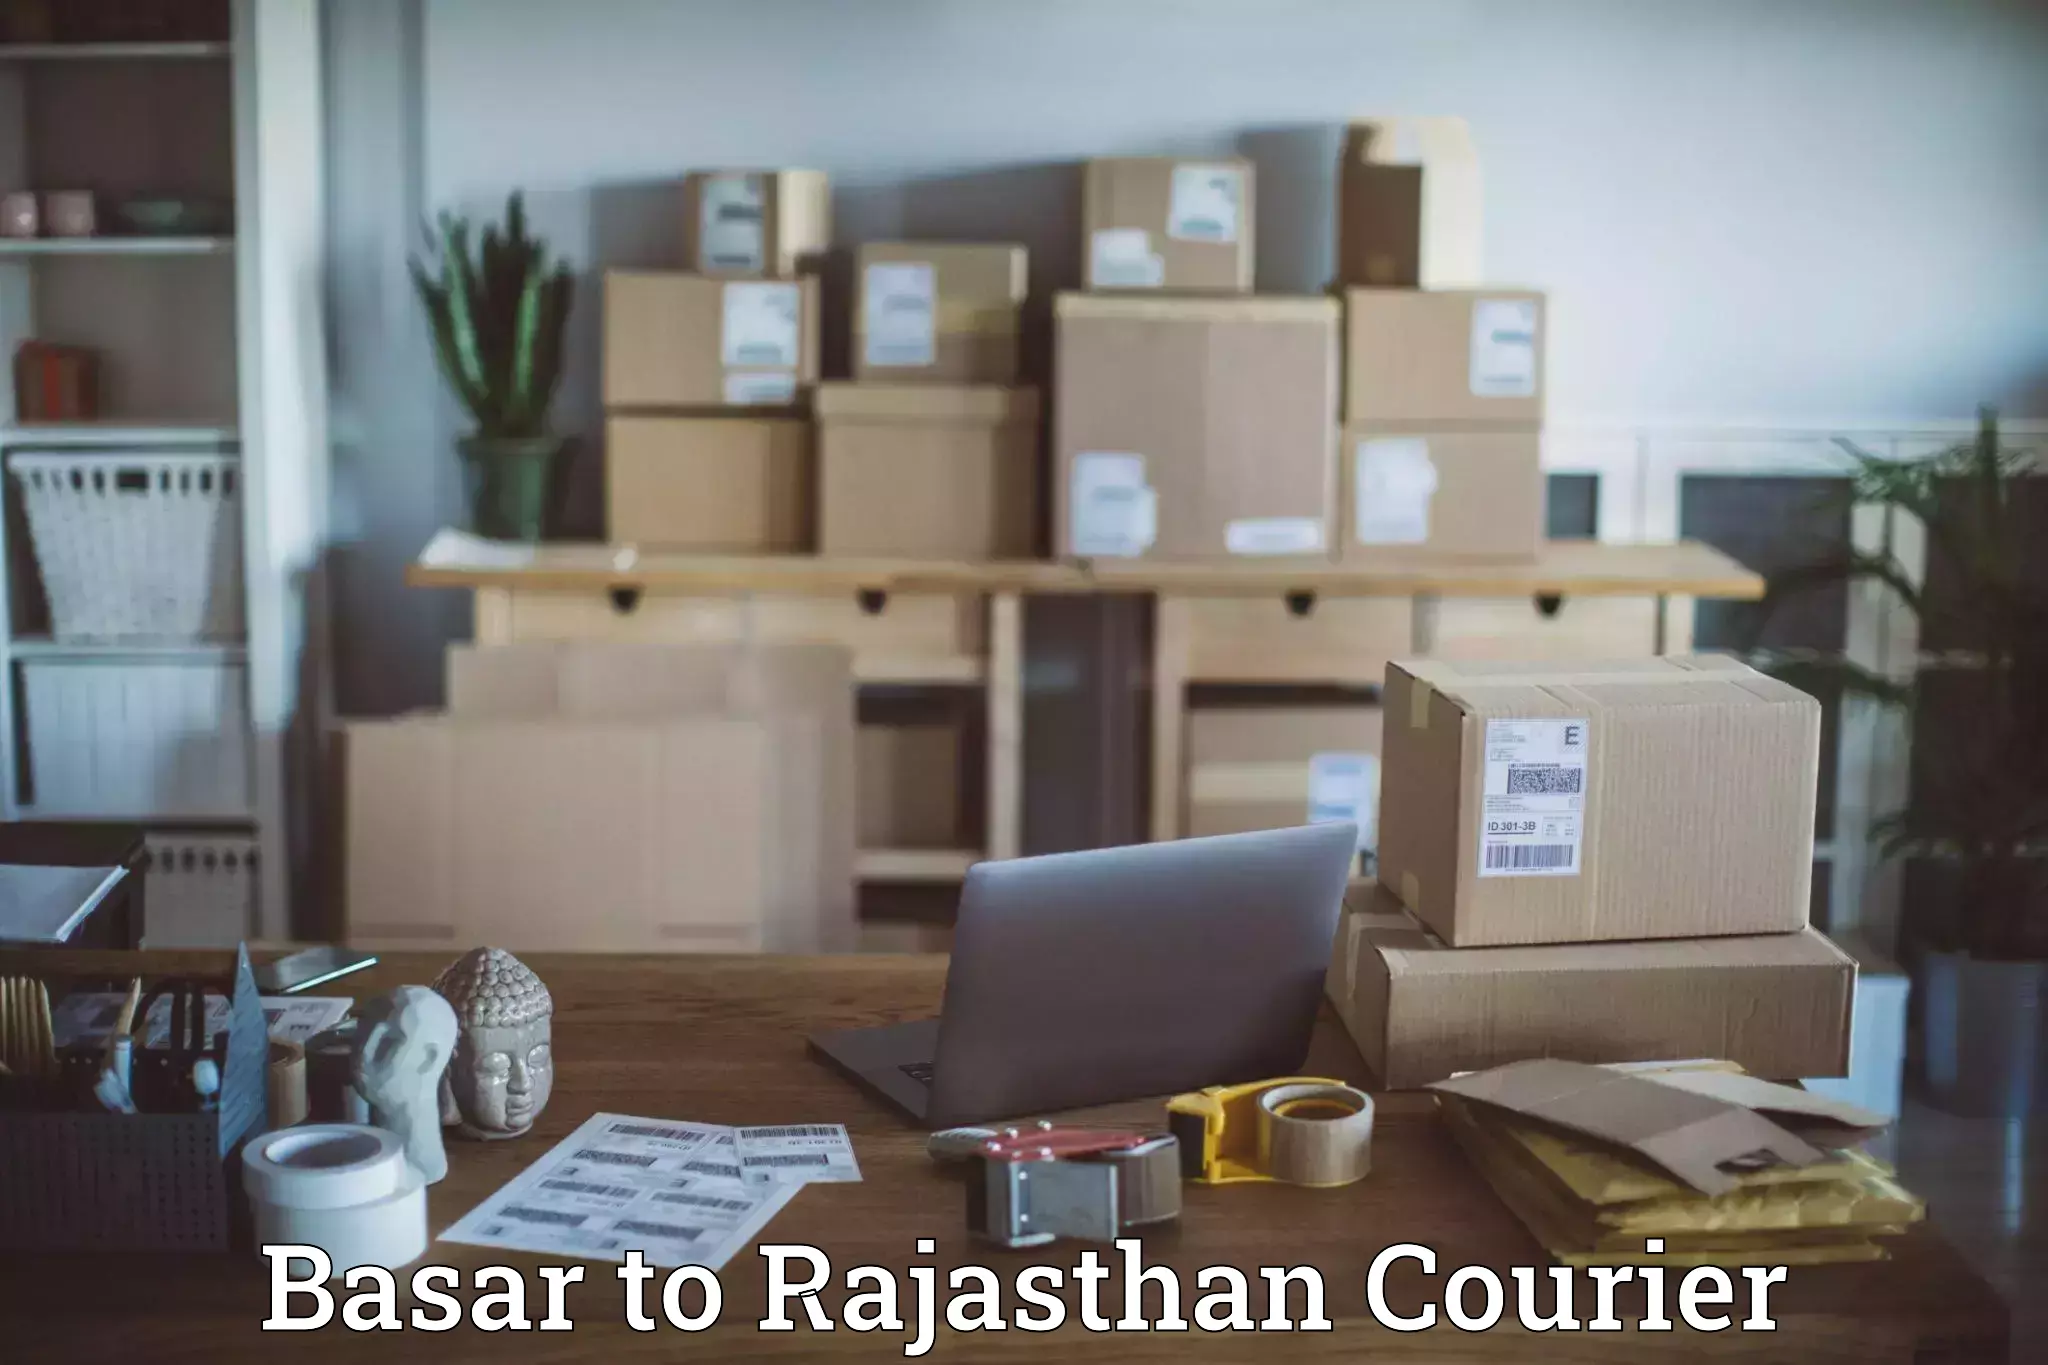 State-of-the-art courier technology Basar to Bhatewar